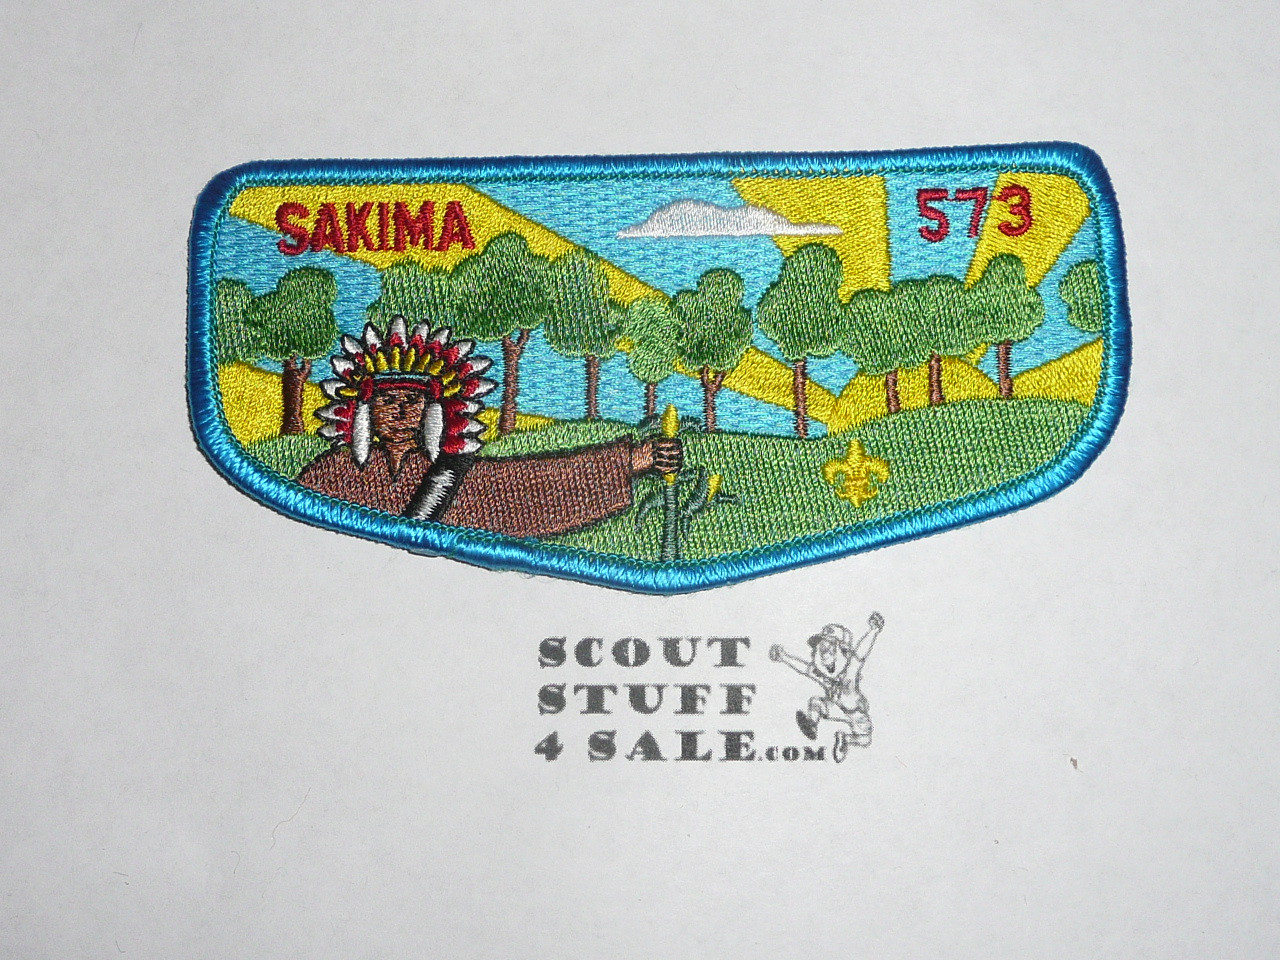 Order of the Arrow Lodge #573 Sakima S24 Flap Patch